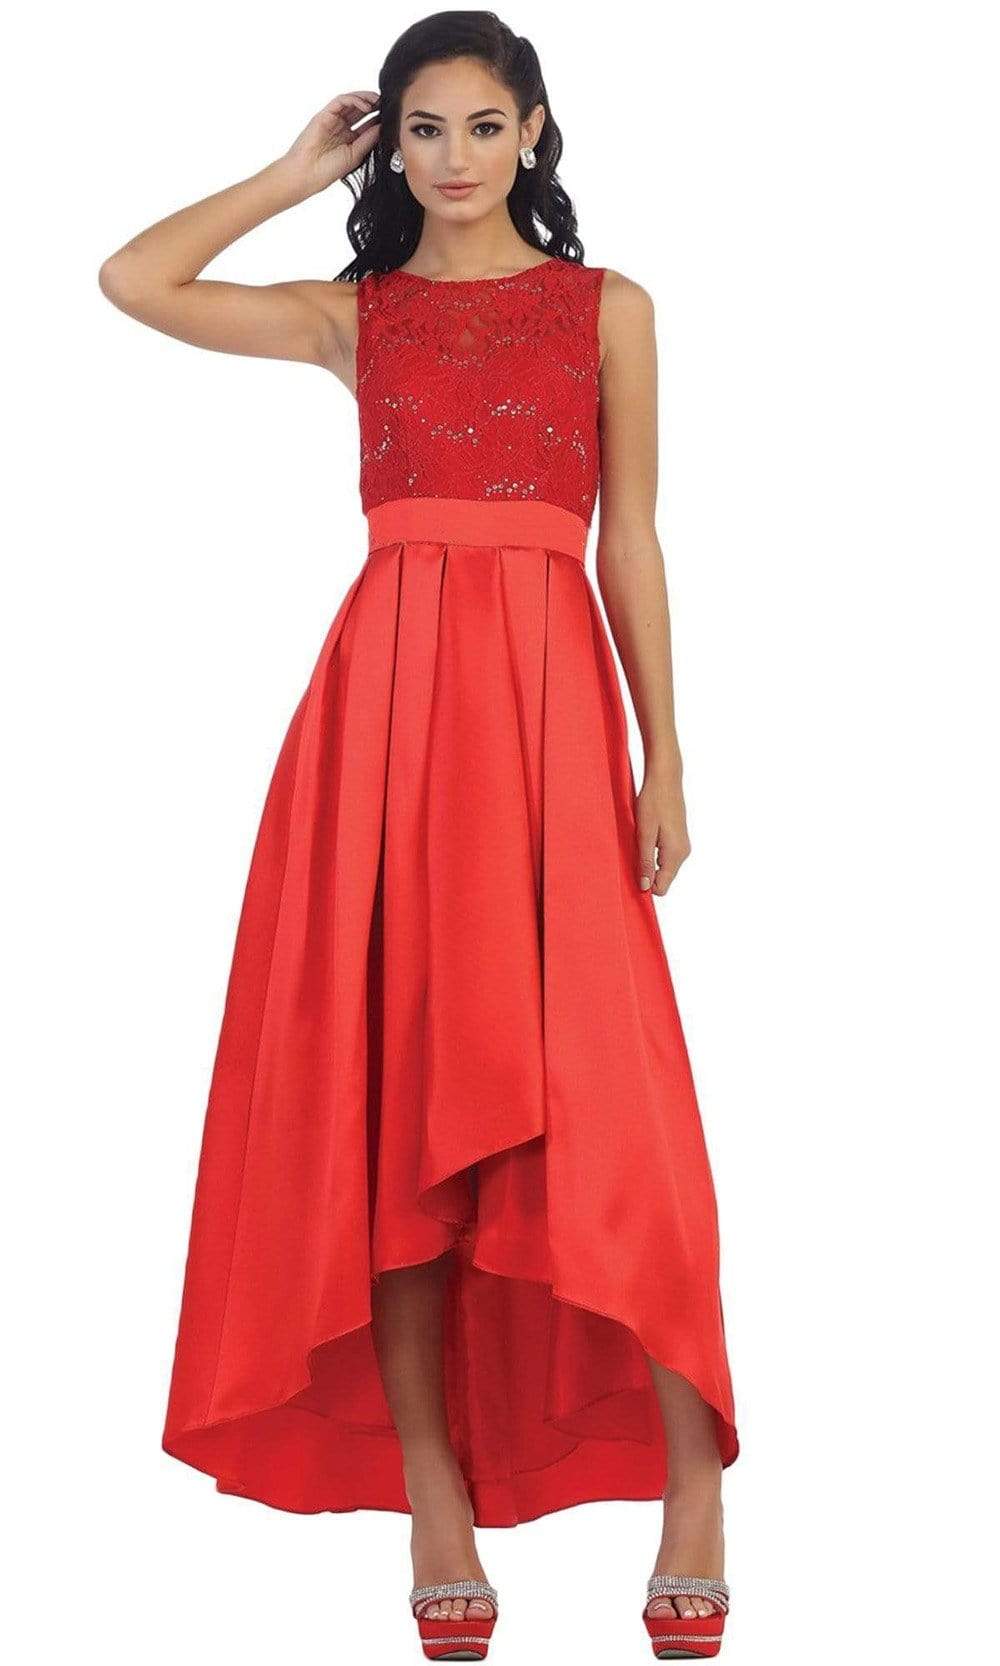 May Queen - High Low Illusion Jewel A-line Evening Dress Special Occasion Dress 4 / Red